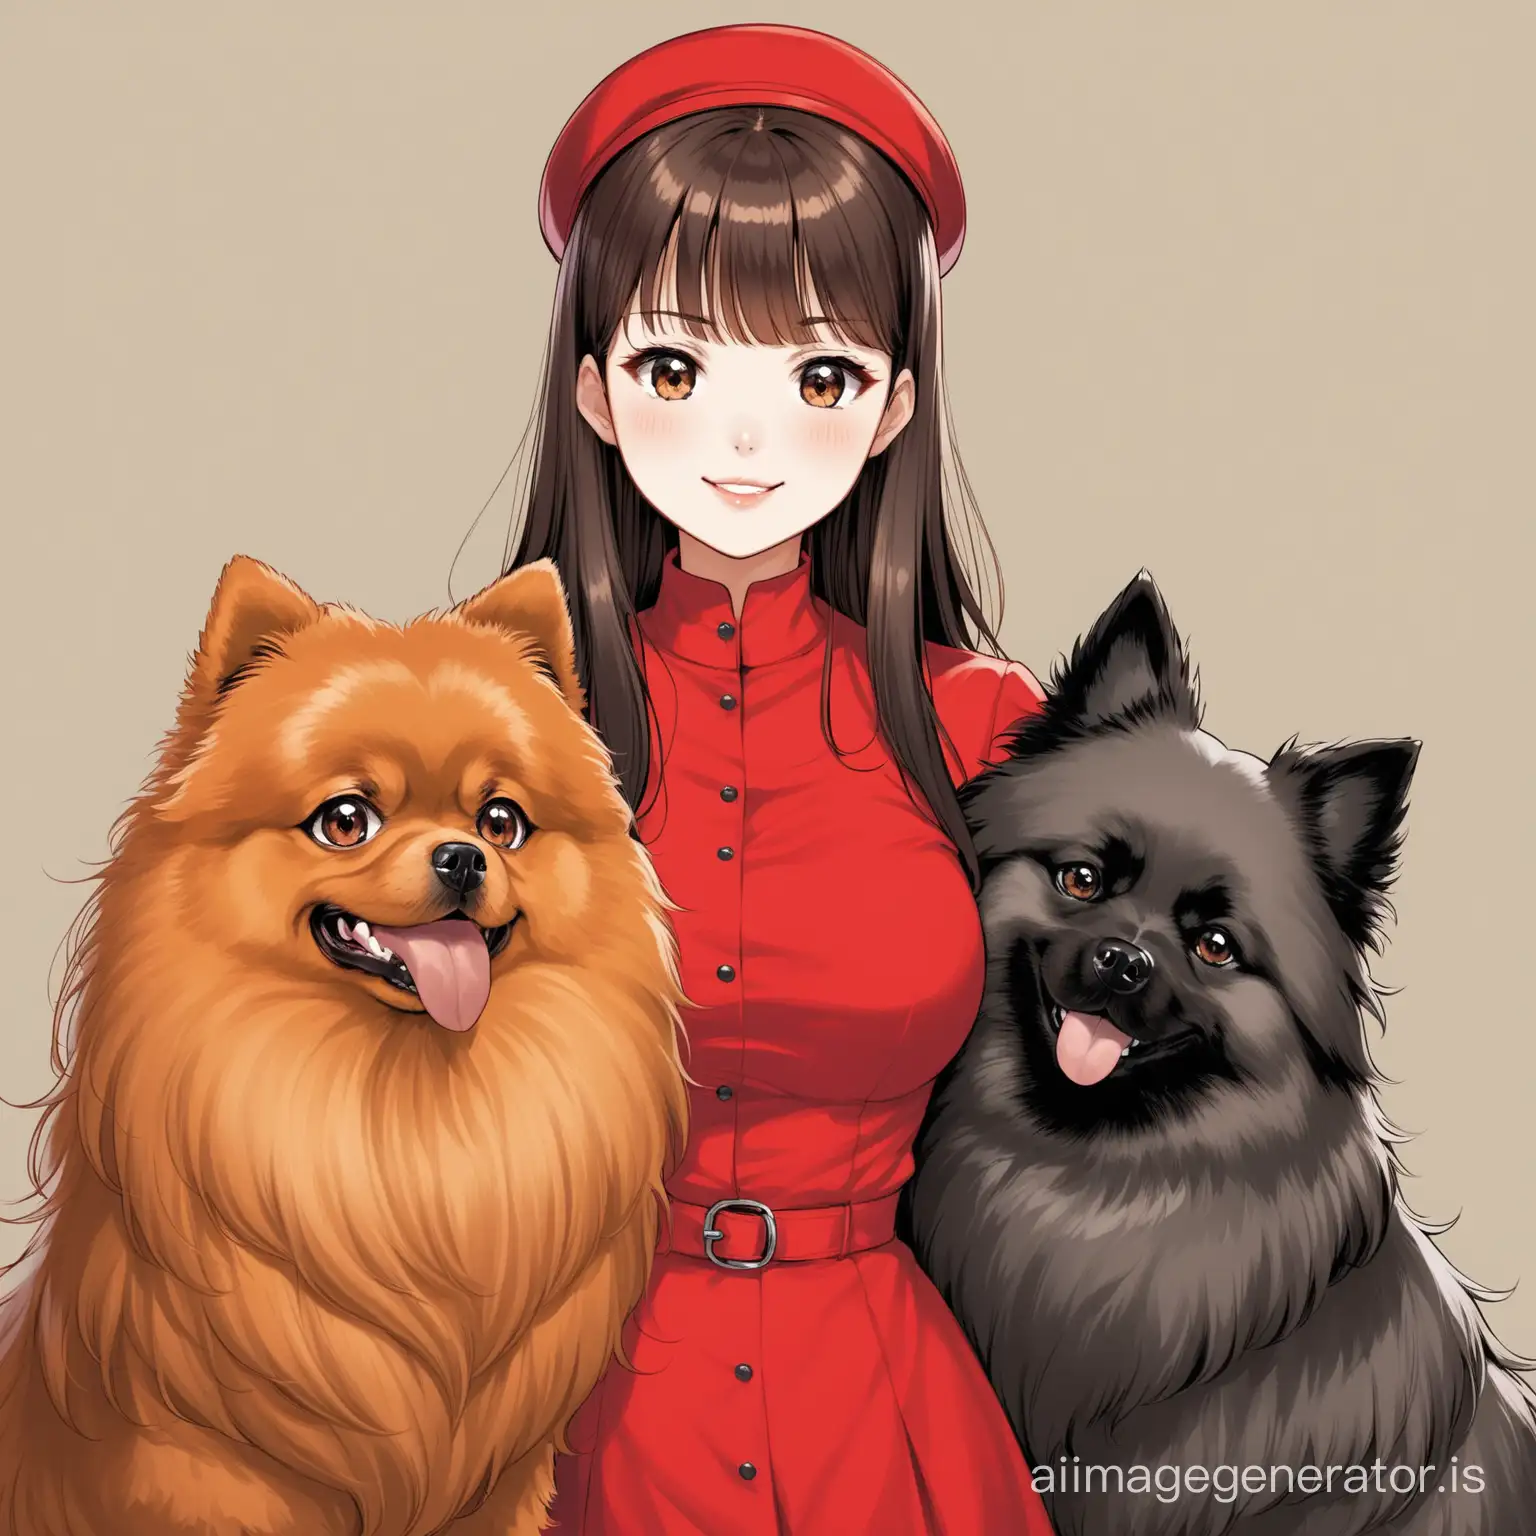 Woman-with-Bangs-Walking-Two-Dogs-Red-Pomeranian-and-Keeshond